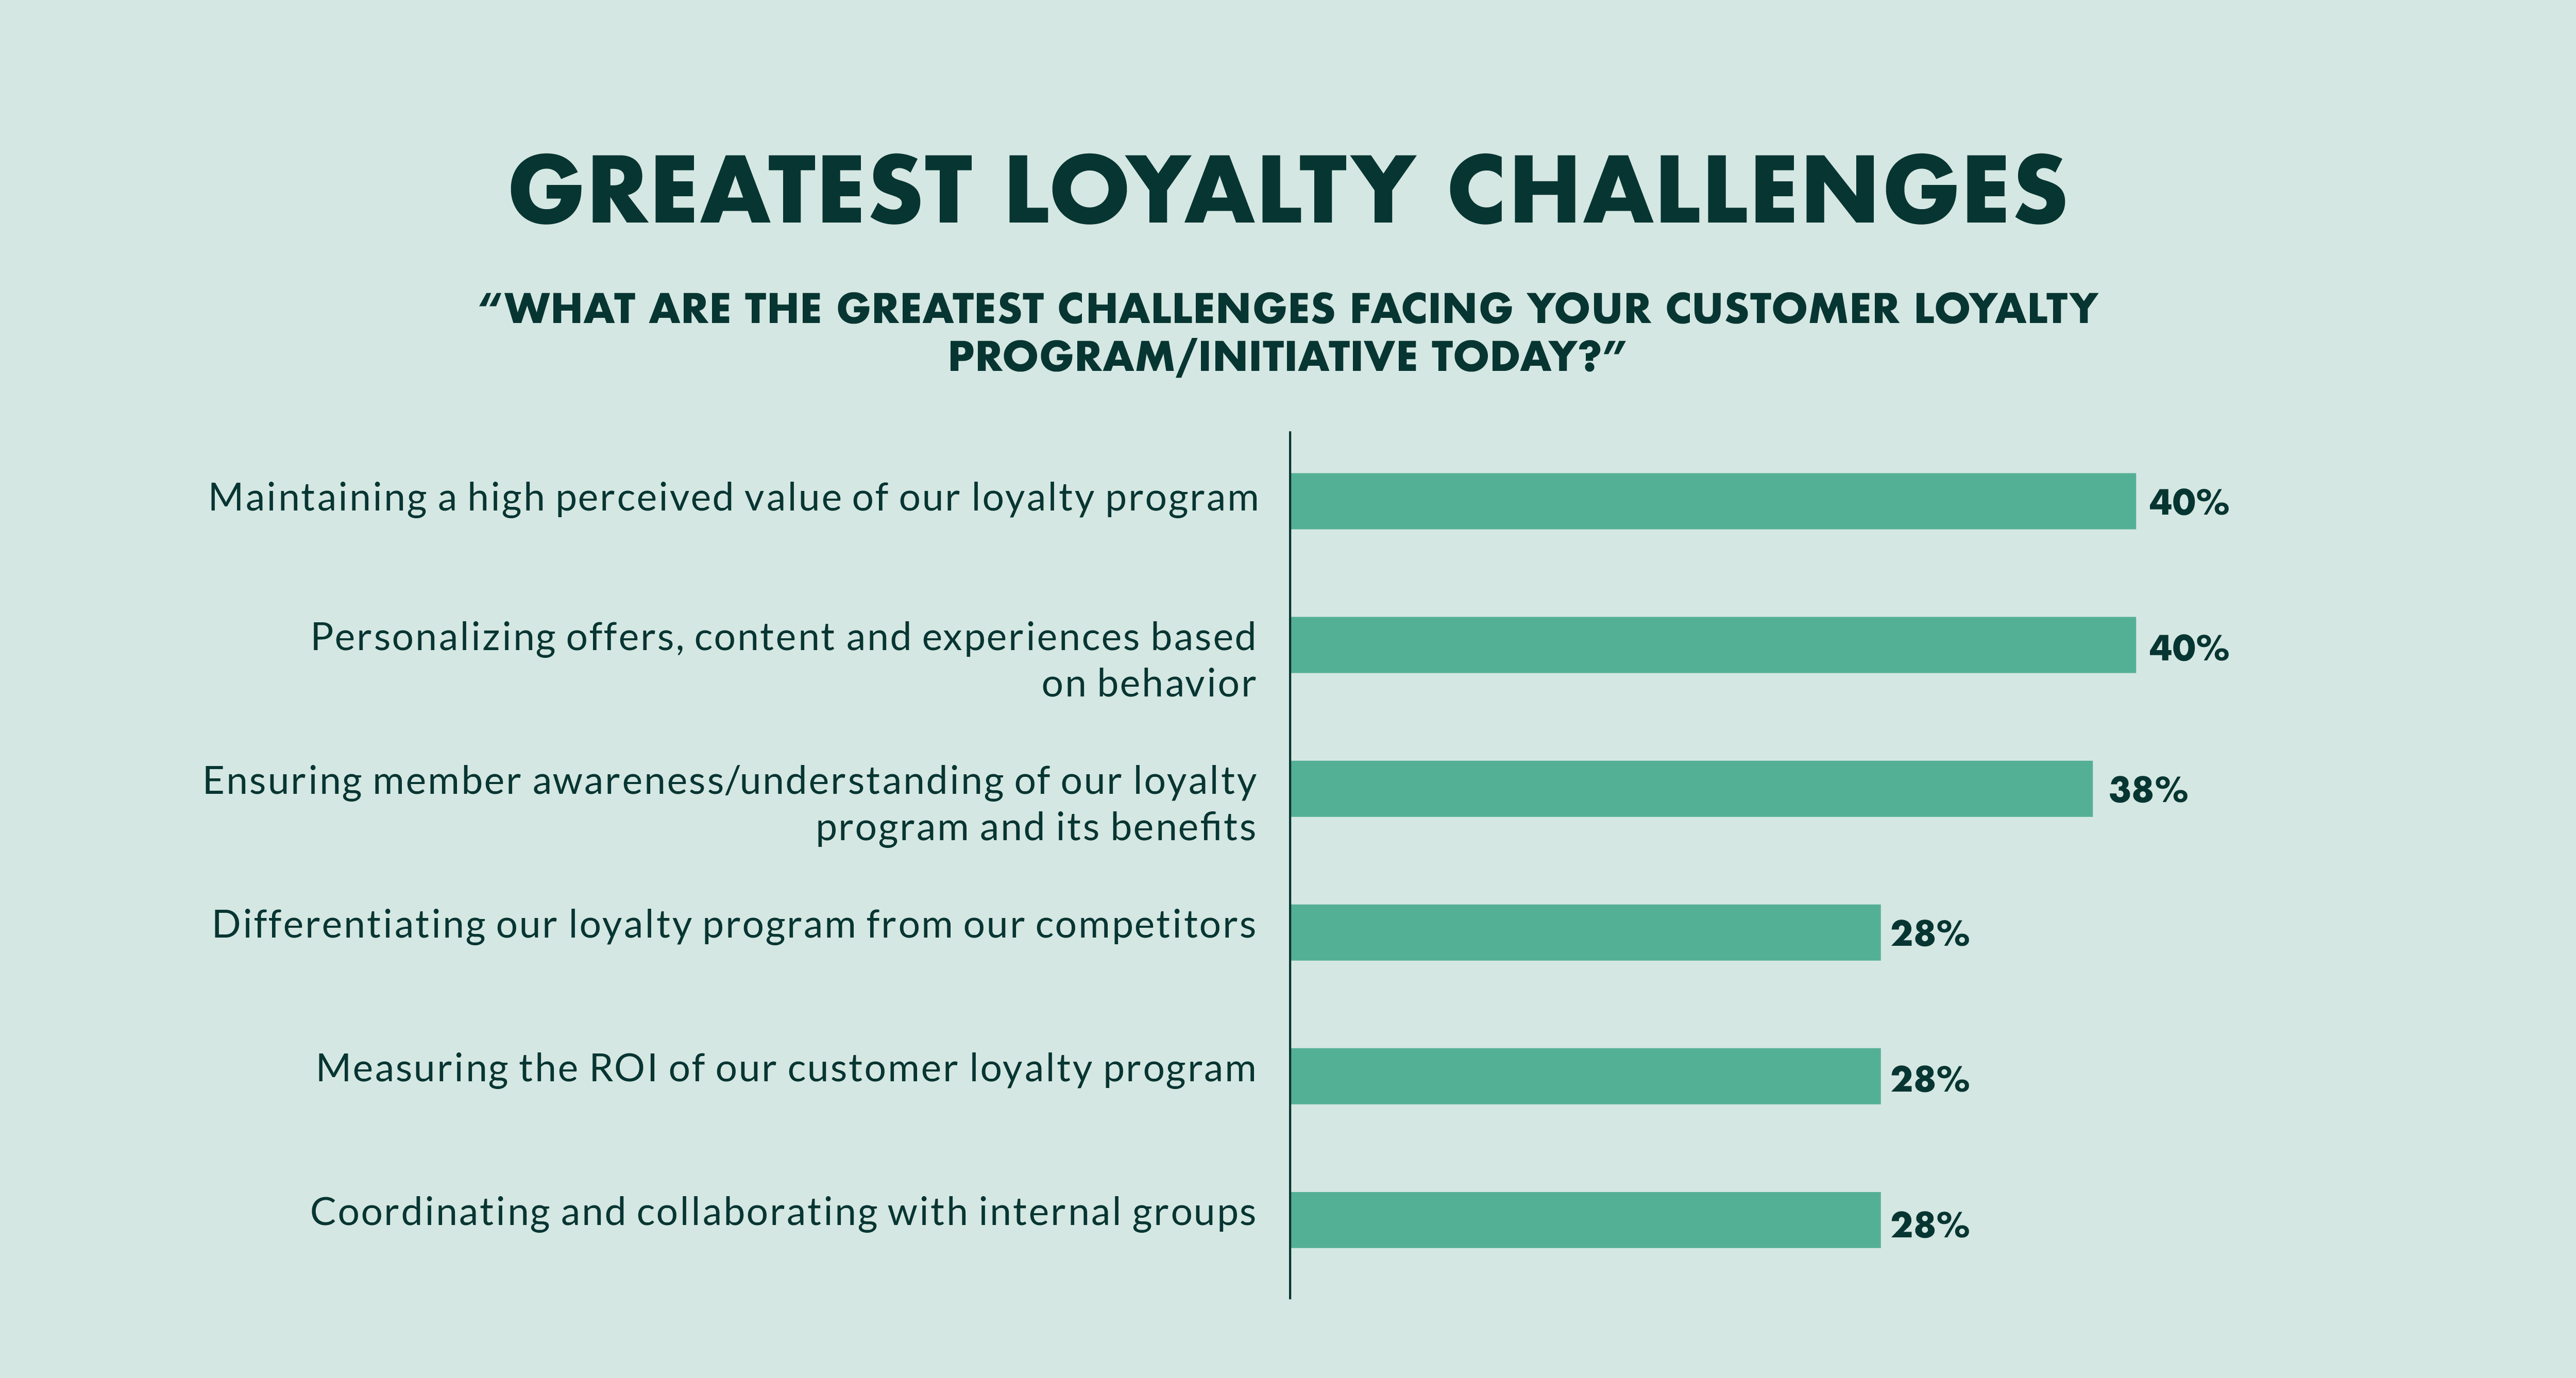 Customer loyalty challenges